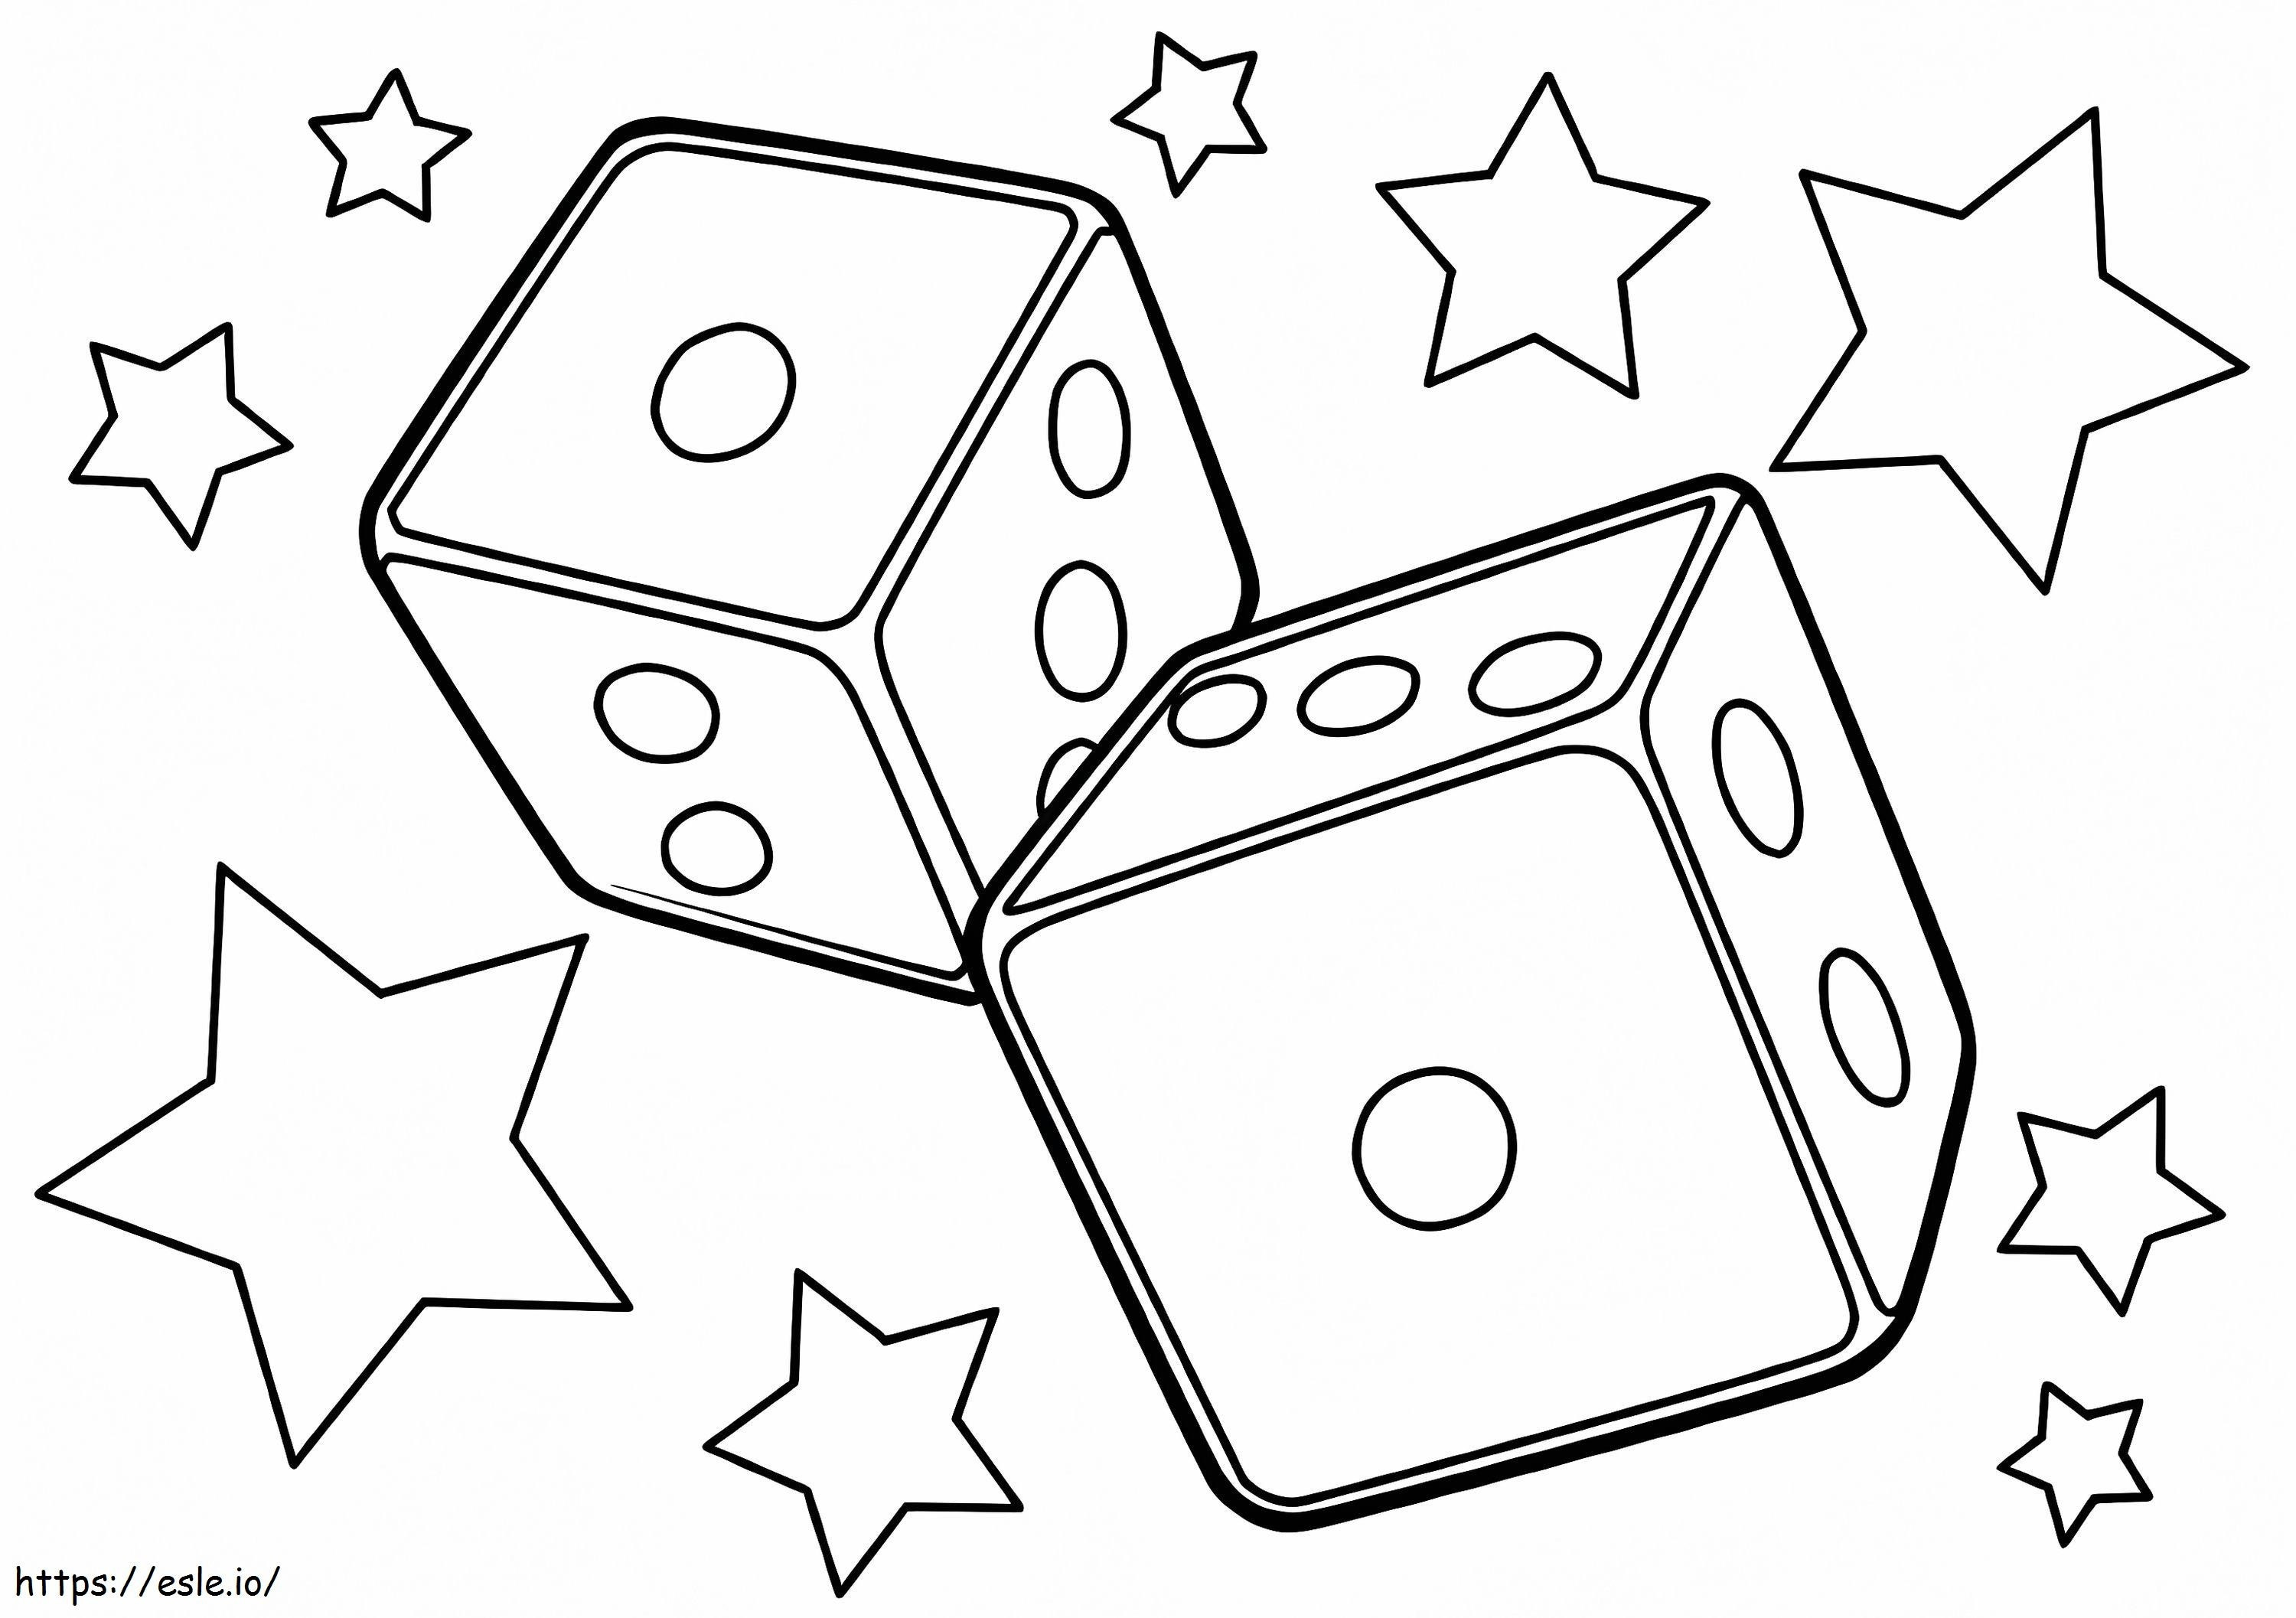 Printable Dice coloring page